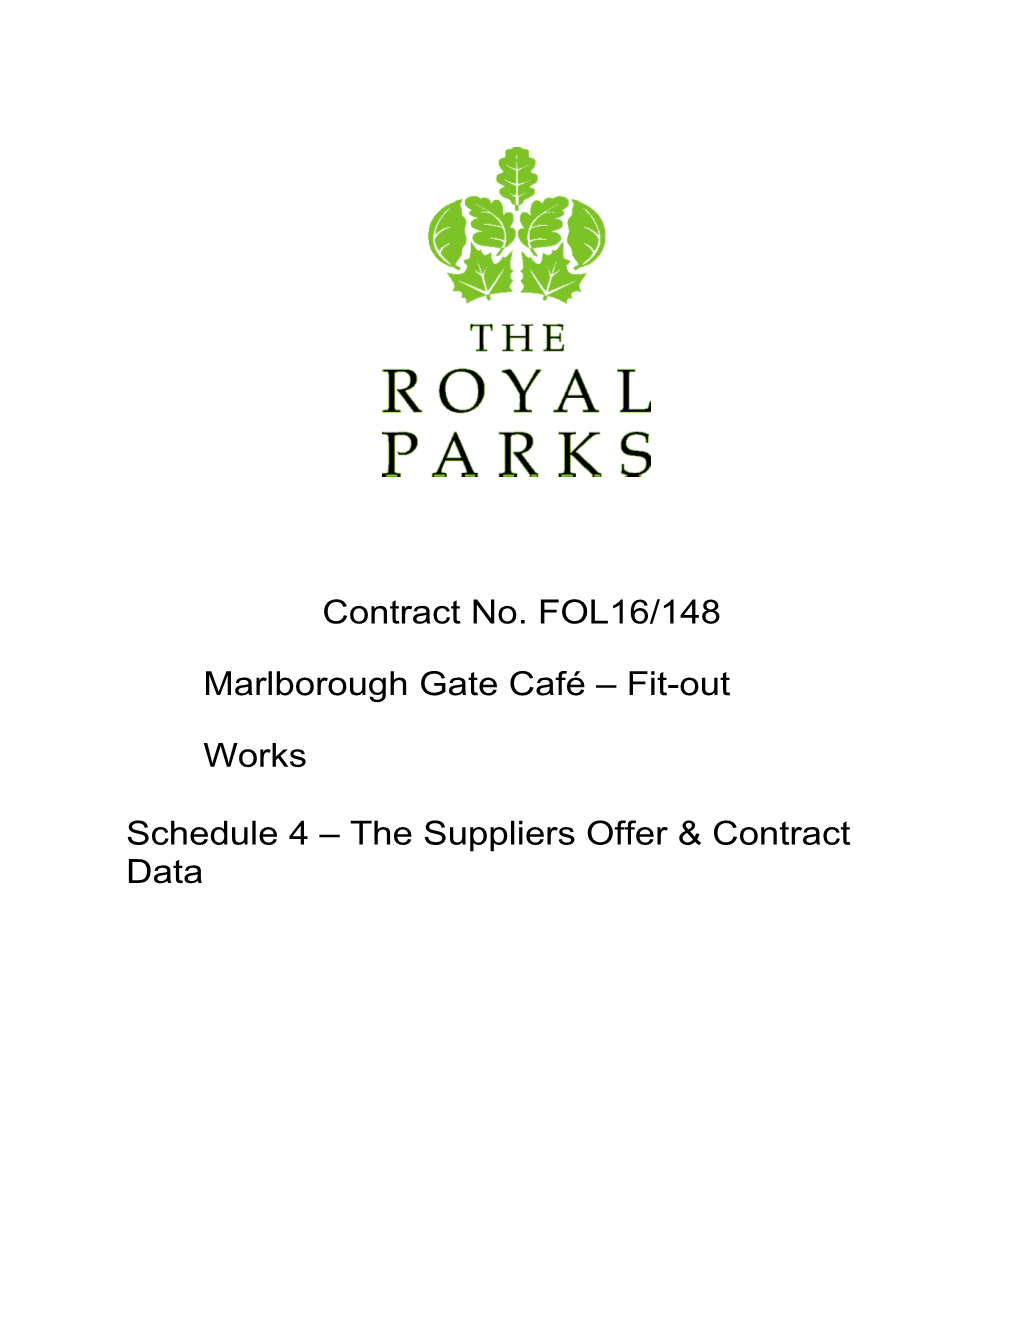 Schedule 4 - TRP MG Cafe Fit-Out Works - the Supplier's Offer and Contract Data